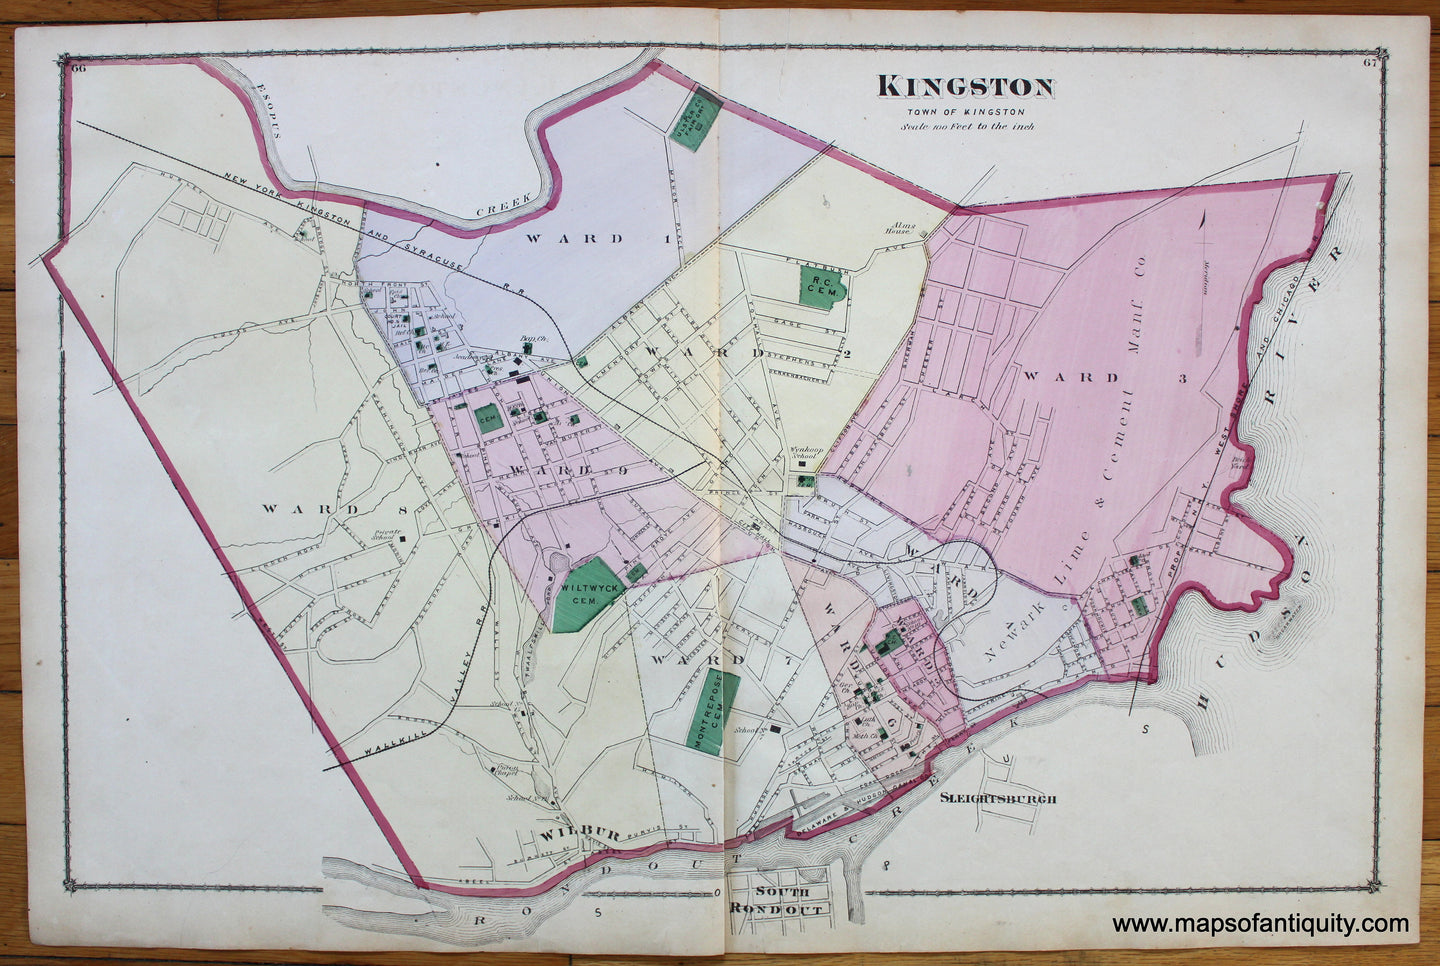 Kingston-Eddyville-Dutch-Settlement-Flatbush-Stony-Hollow-Ulster-County-New-York-1875-Beers-1870s-1800s-19th-century-antique-Maps-of-Antiquity